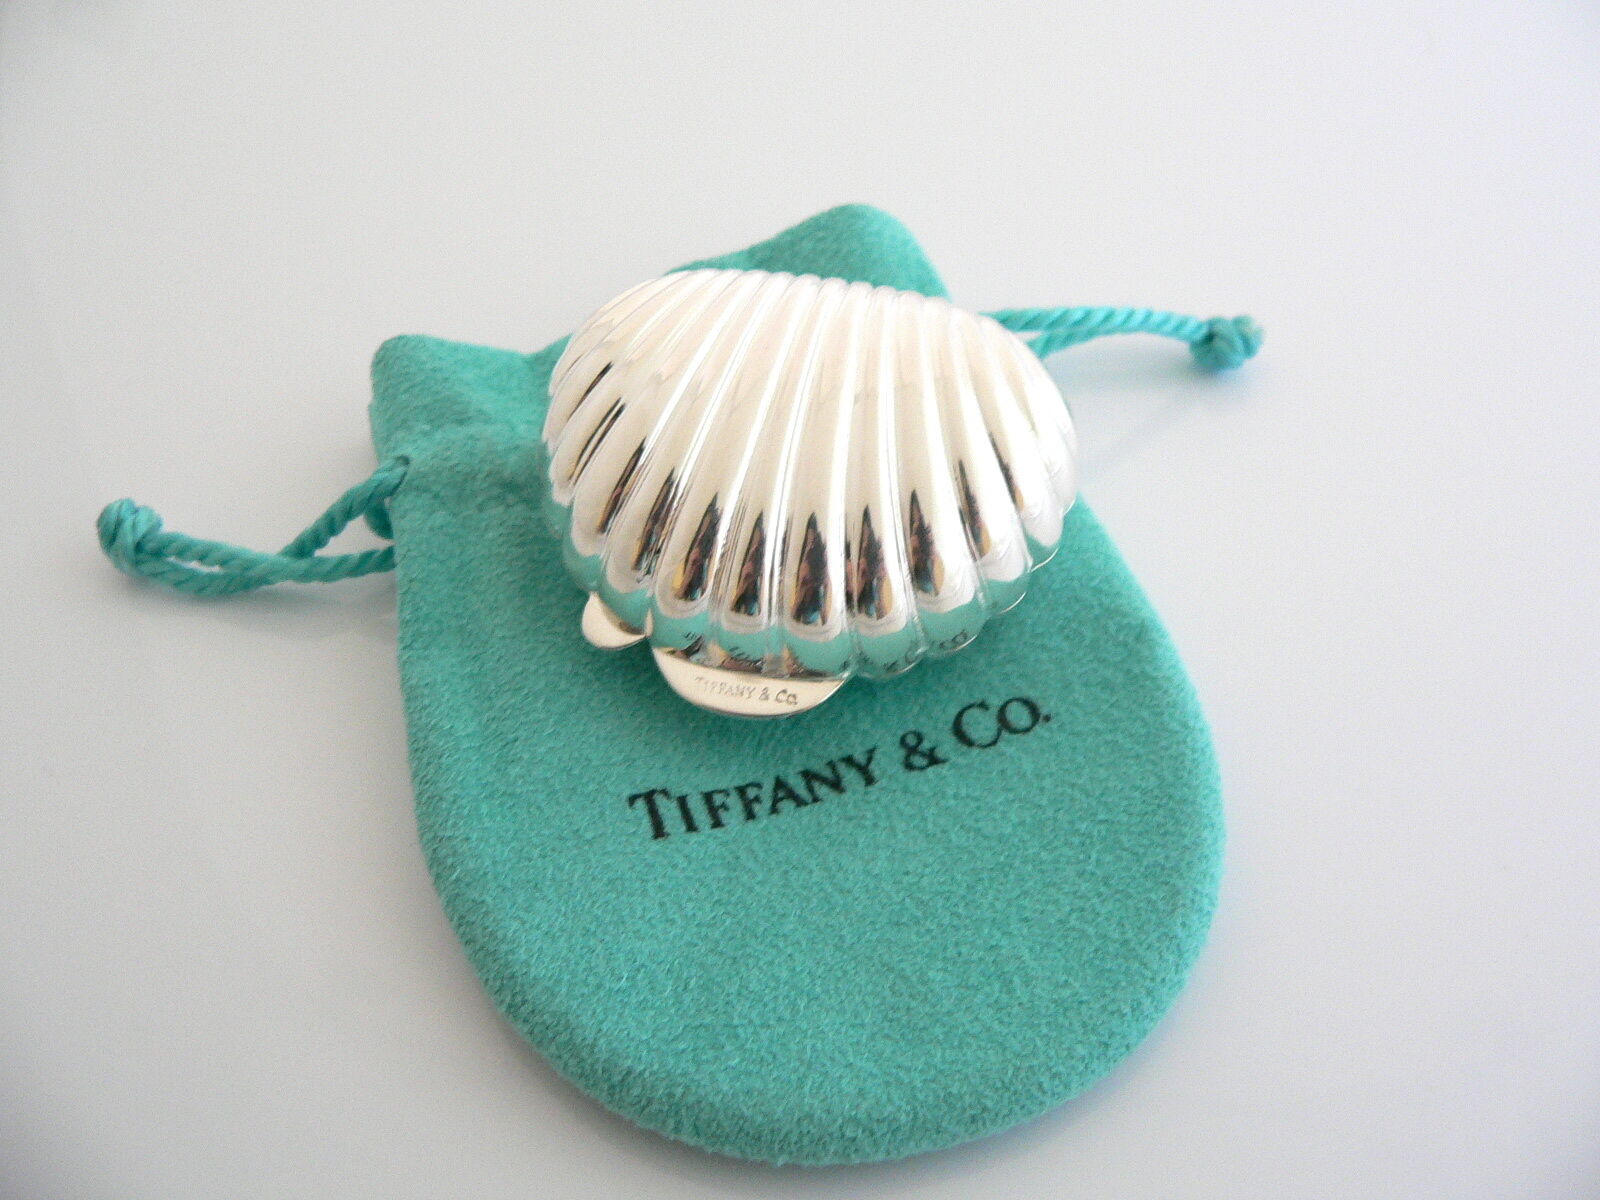 Tiffany & Co Silver Shell Oyster Clam Pill Box Case Container Love Gift Pouch